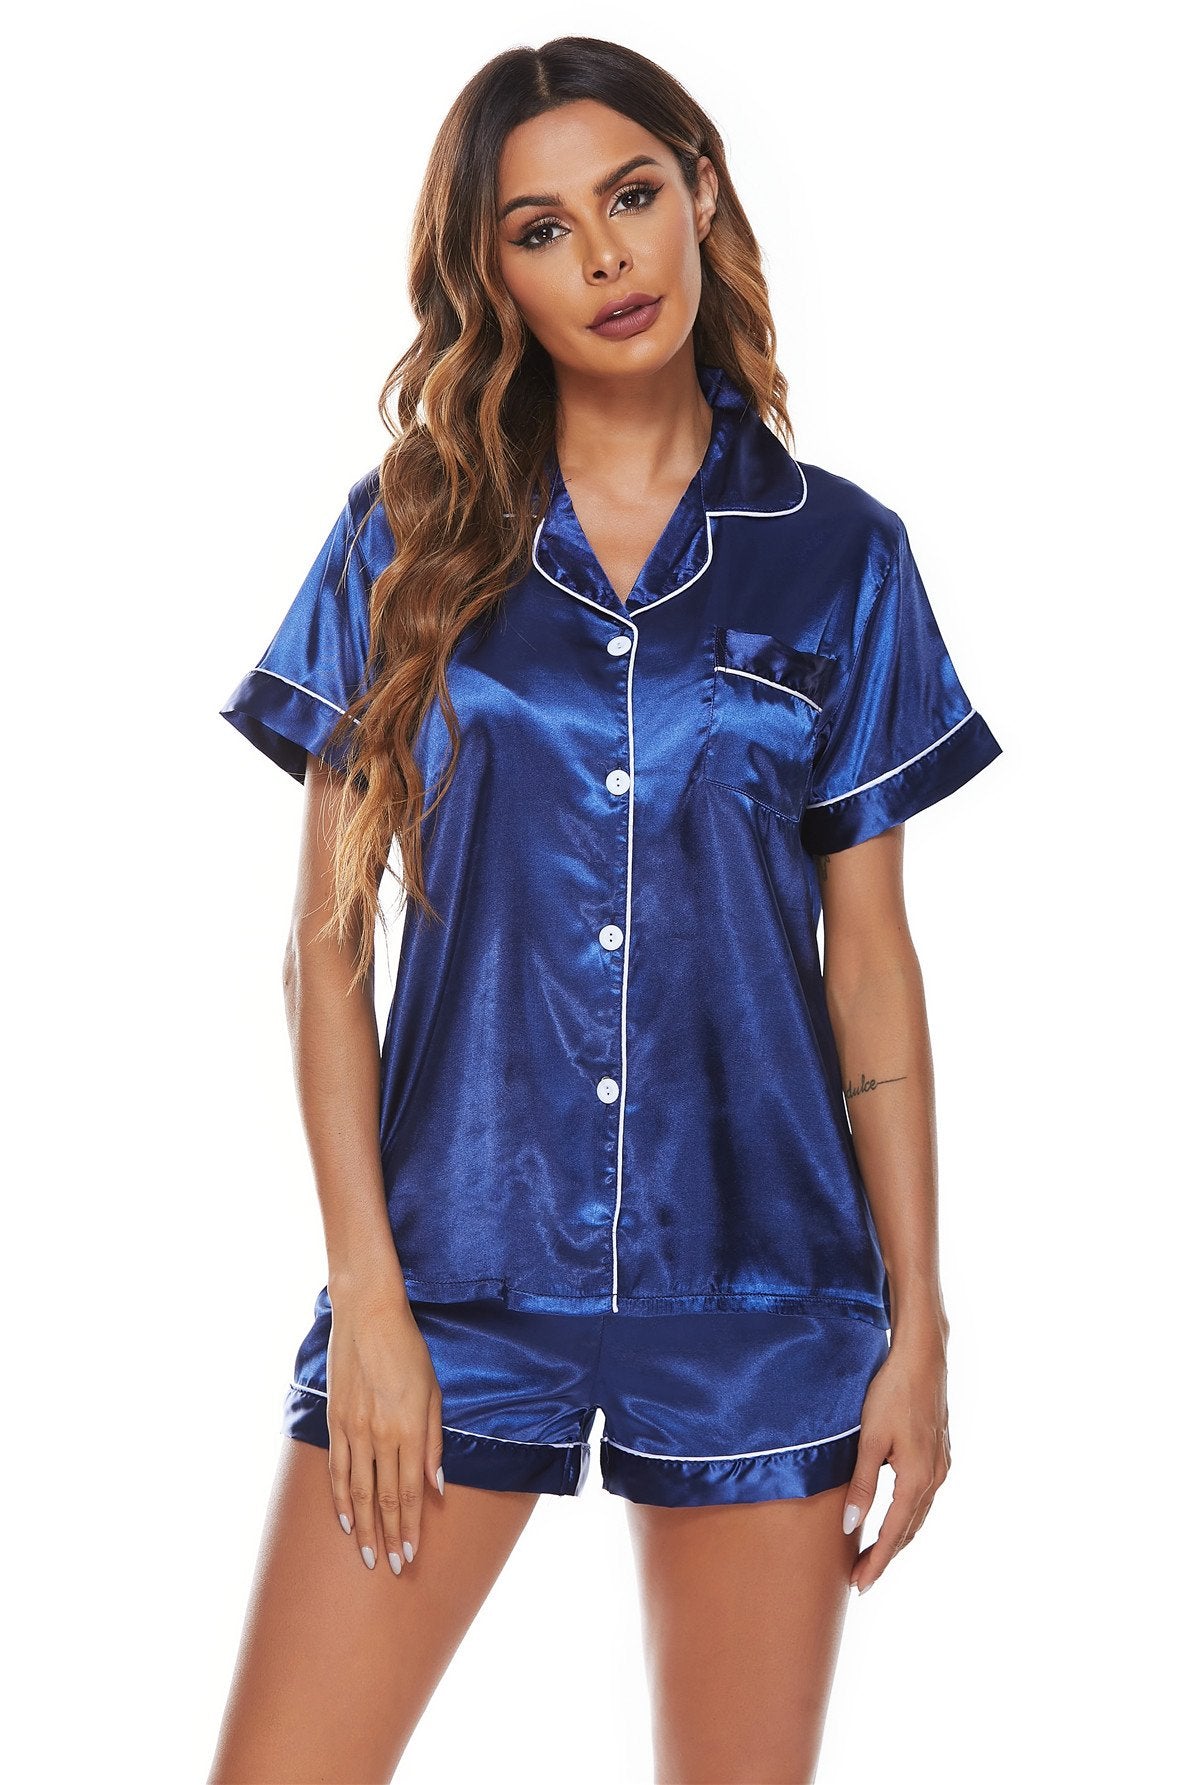 Satin Sleepwear And Sexy Pajamas That Are Comfy, Too 